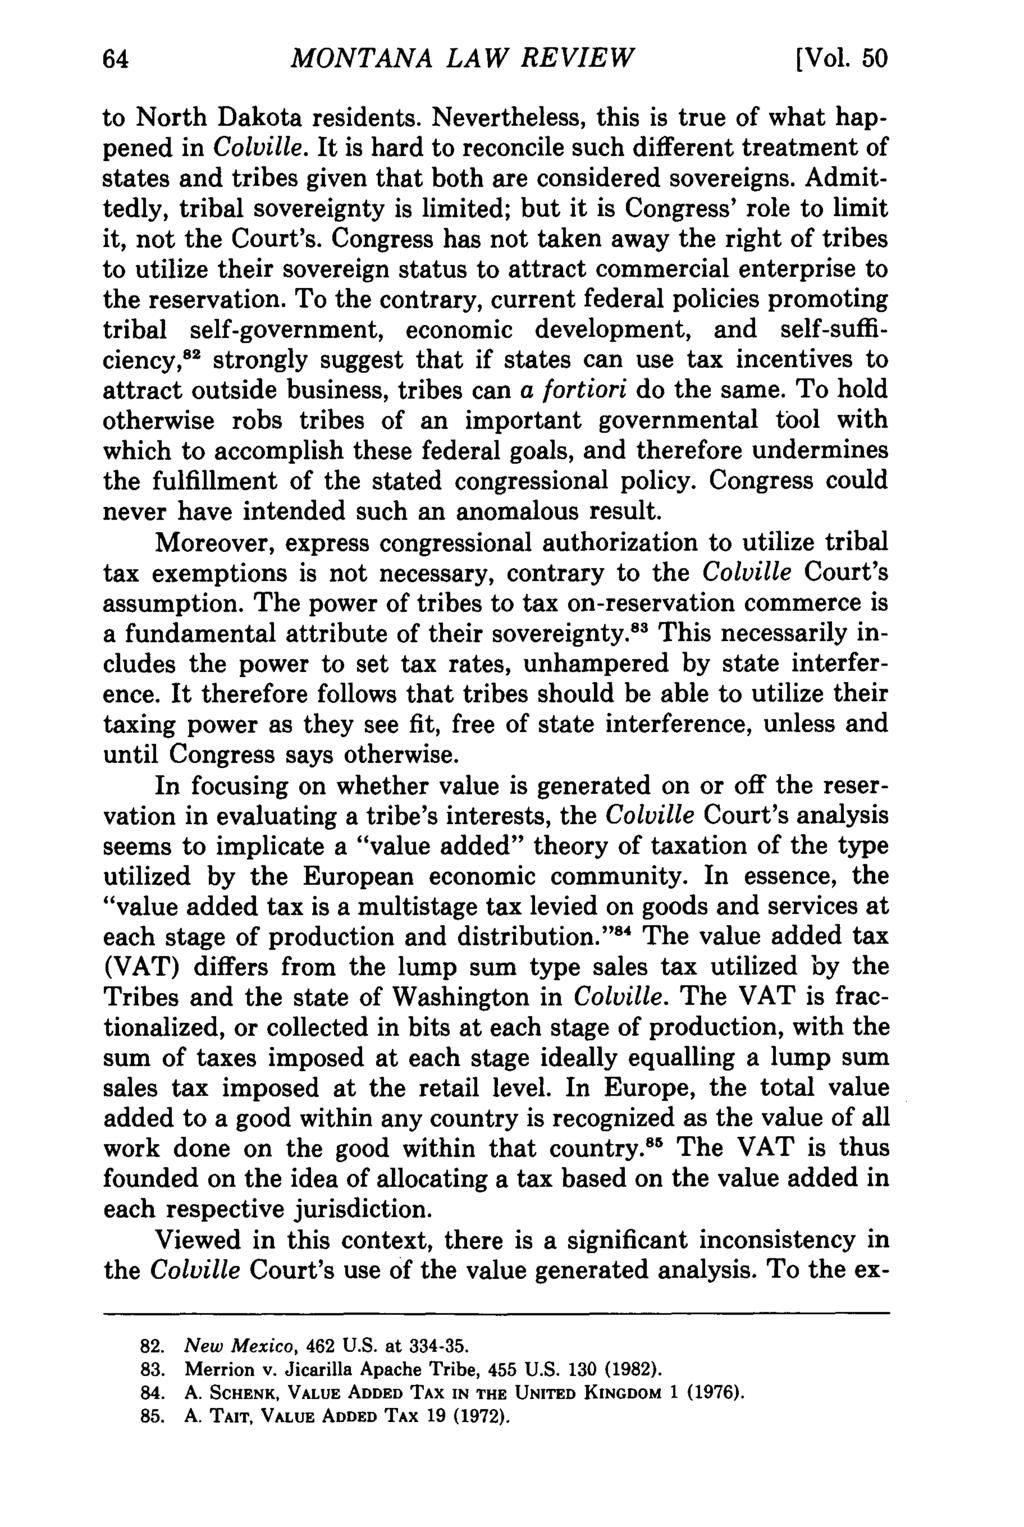 MONTANA Montana Law Review, LAW Vol. REVIEW 50 [1989], Iss. 1, Art. 3 [Vol. 50 to North Dakota residents. Nevertheless, this is true of what happened in Colville.